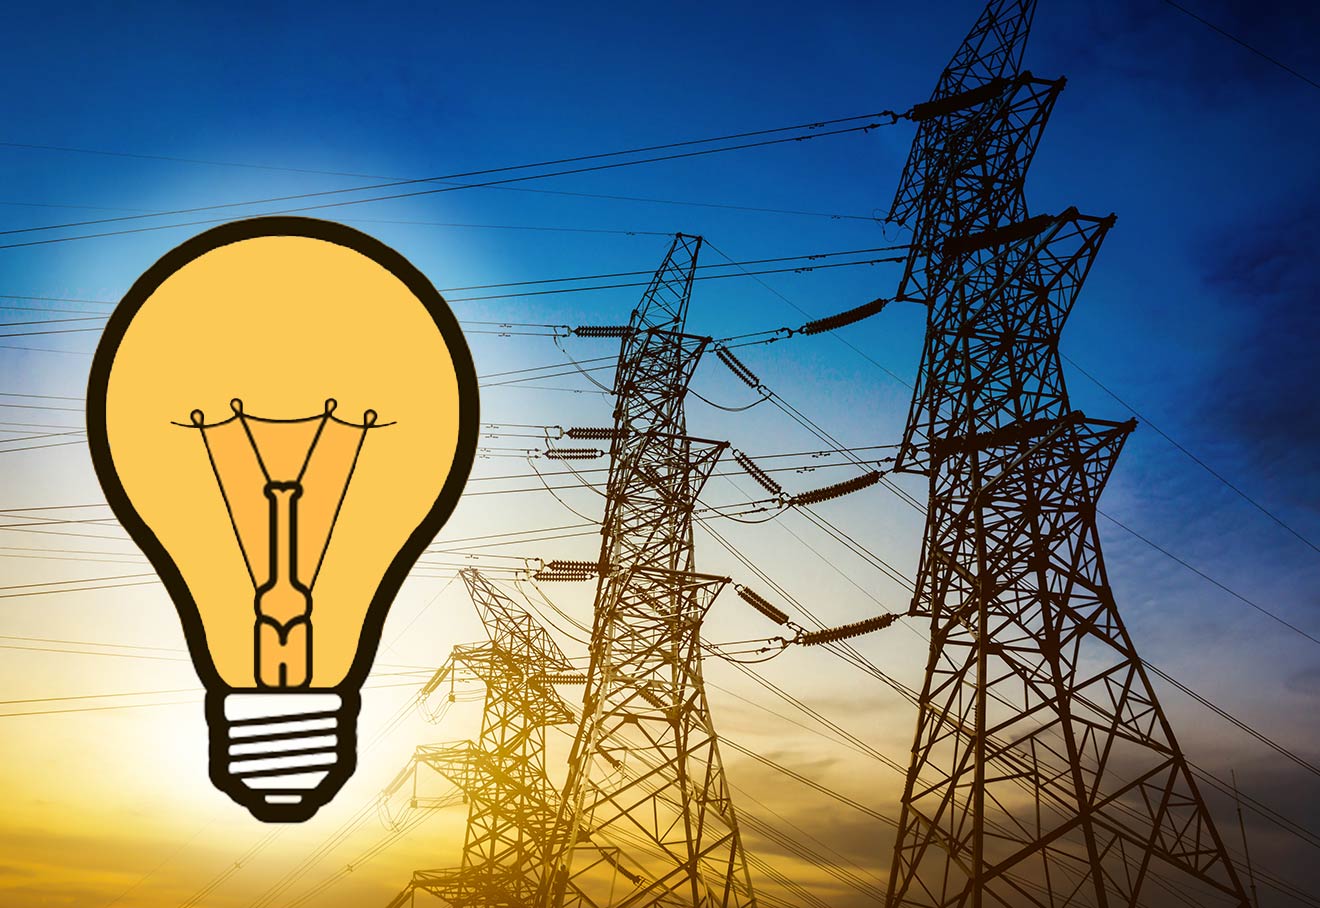 Haryana To Soon Launch Scheme To Provide 24x7 Power Supply To Industries